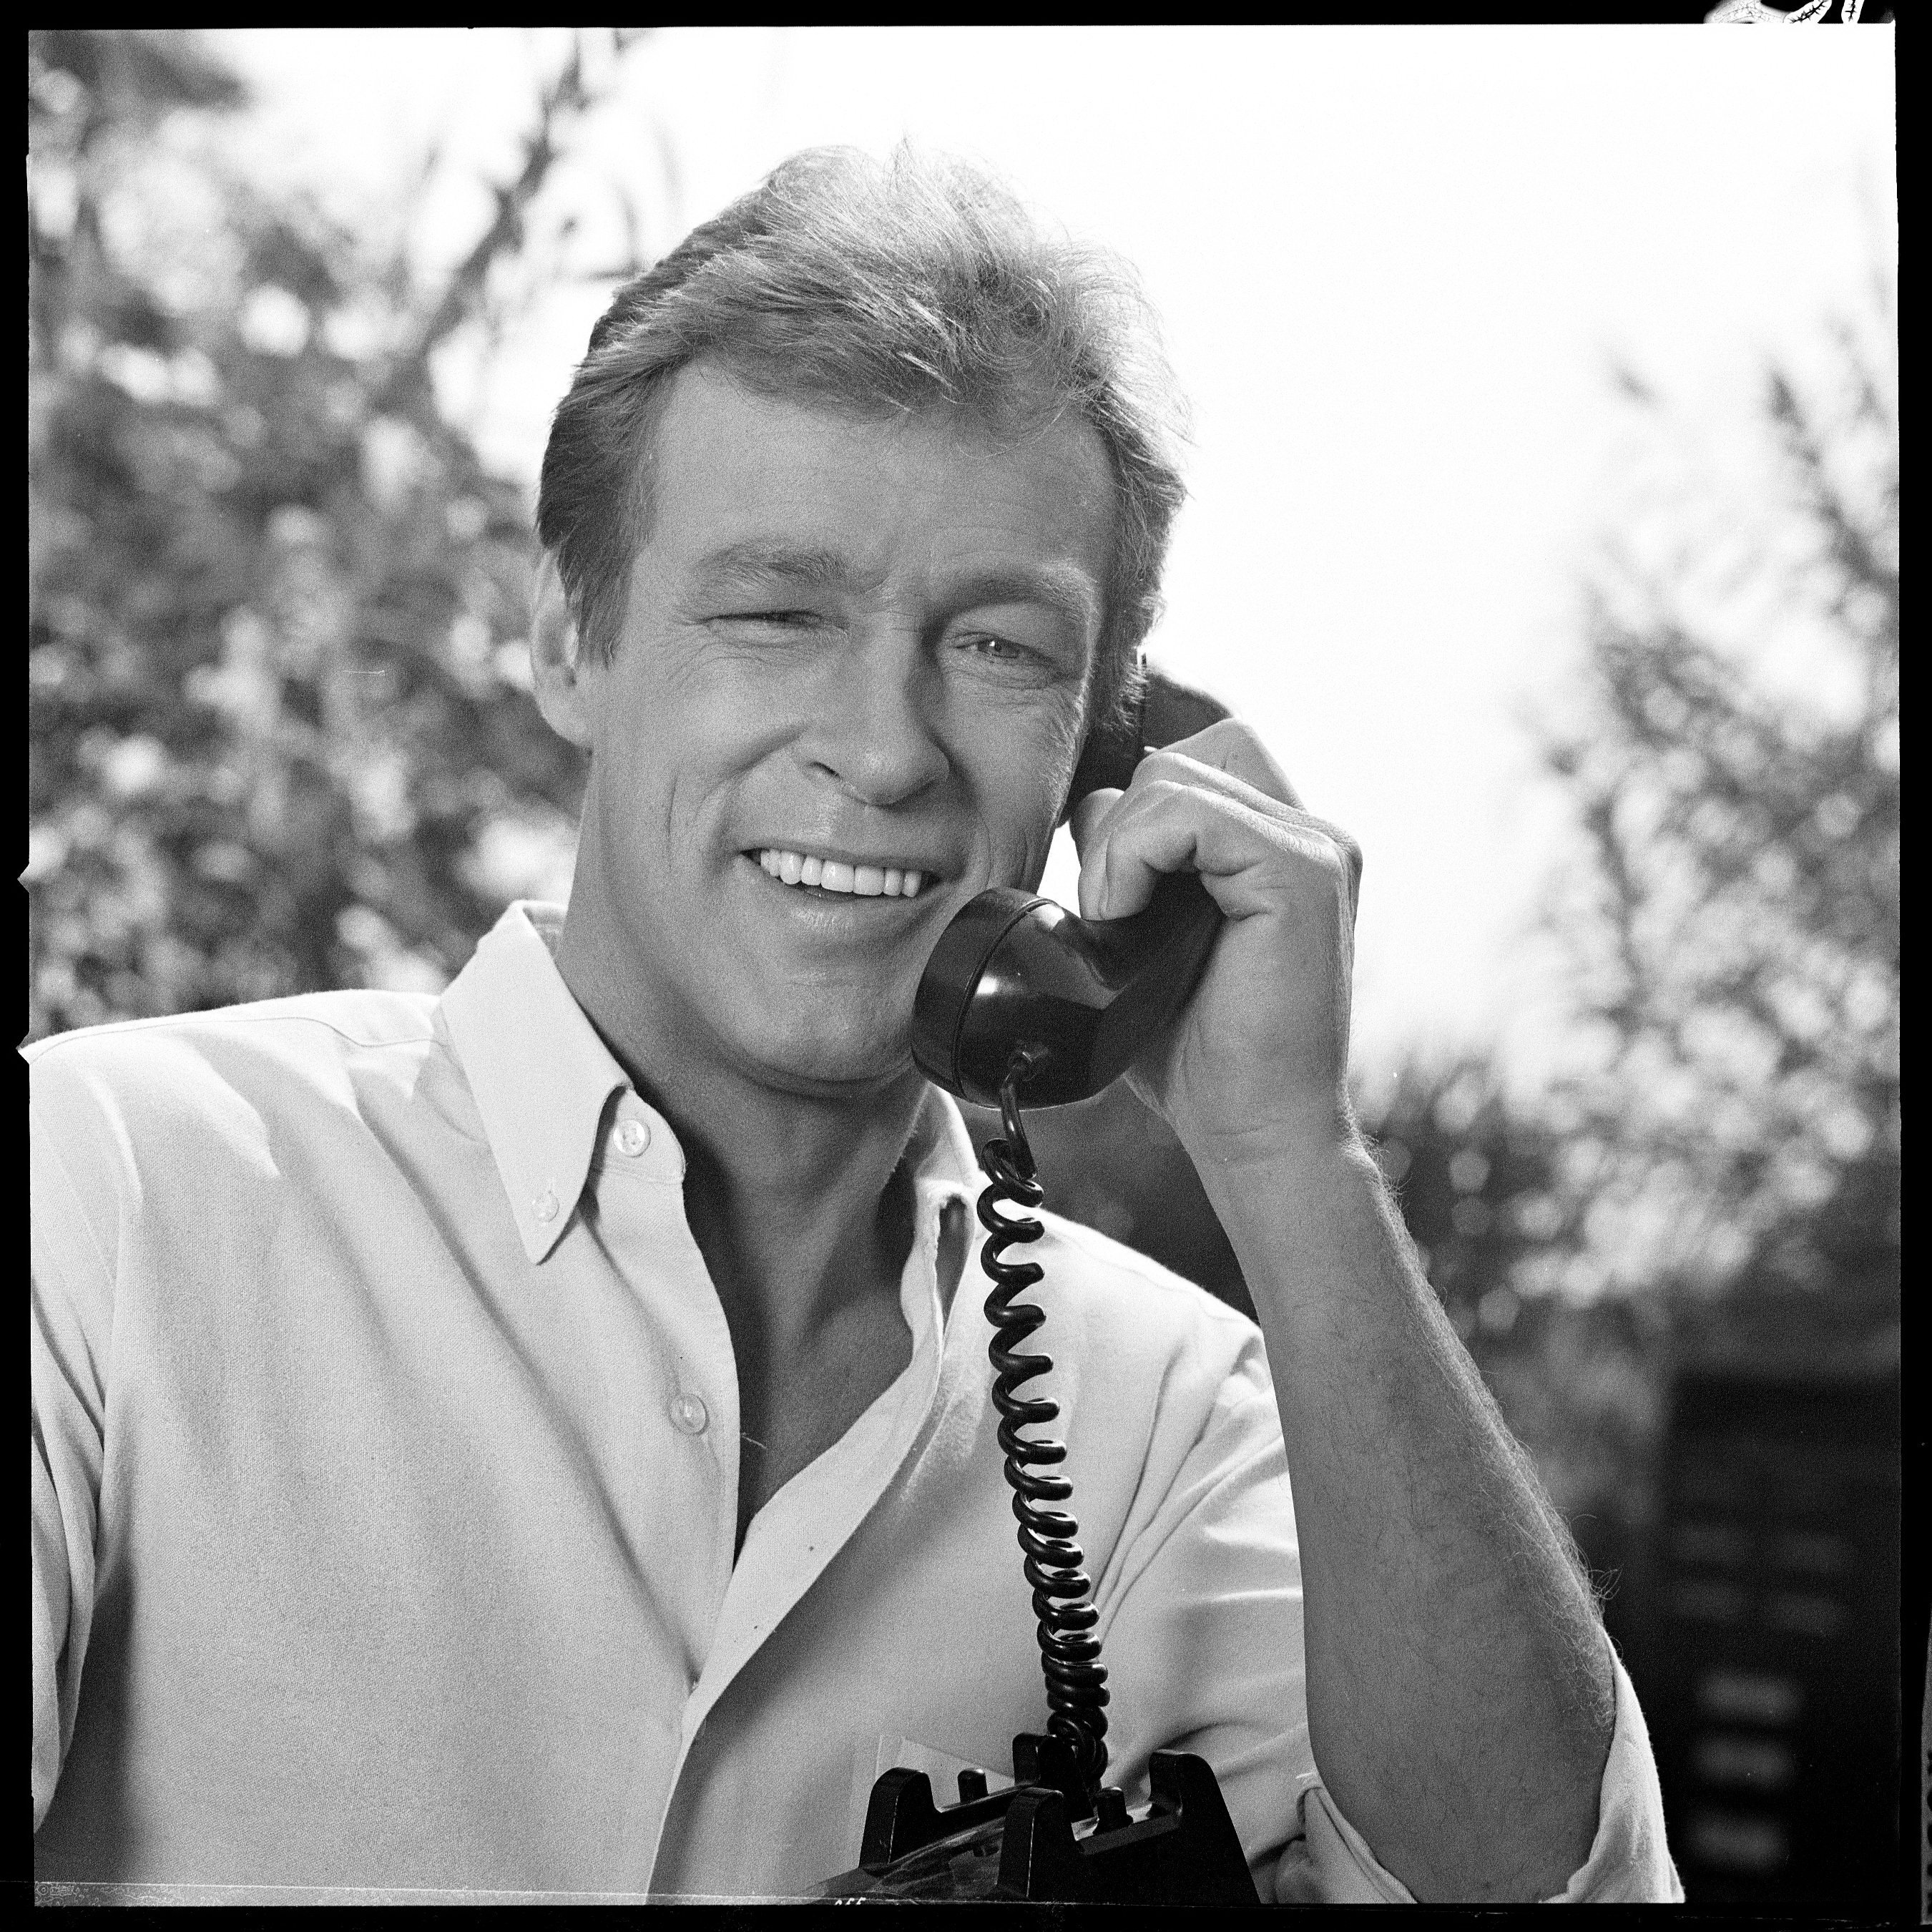 Russell Johnson as Professor Roy Hinkley in an episode of "My Hero" in "Gilligan's Island" TV series photographed on August 17, 1965. 